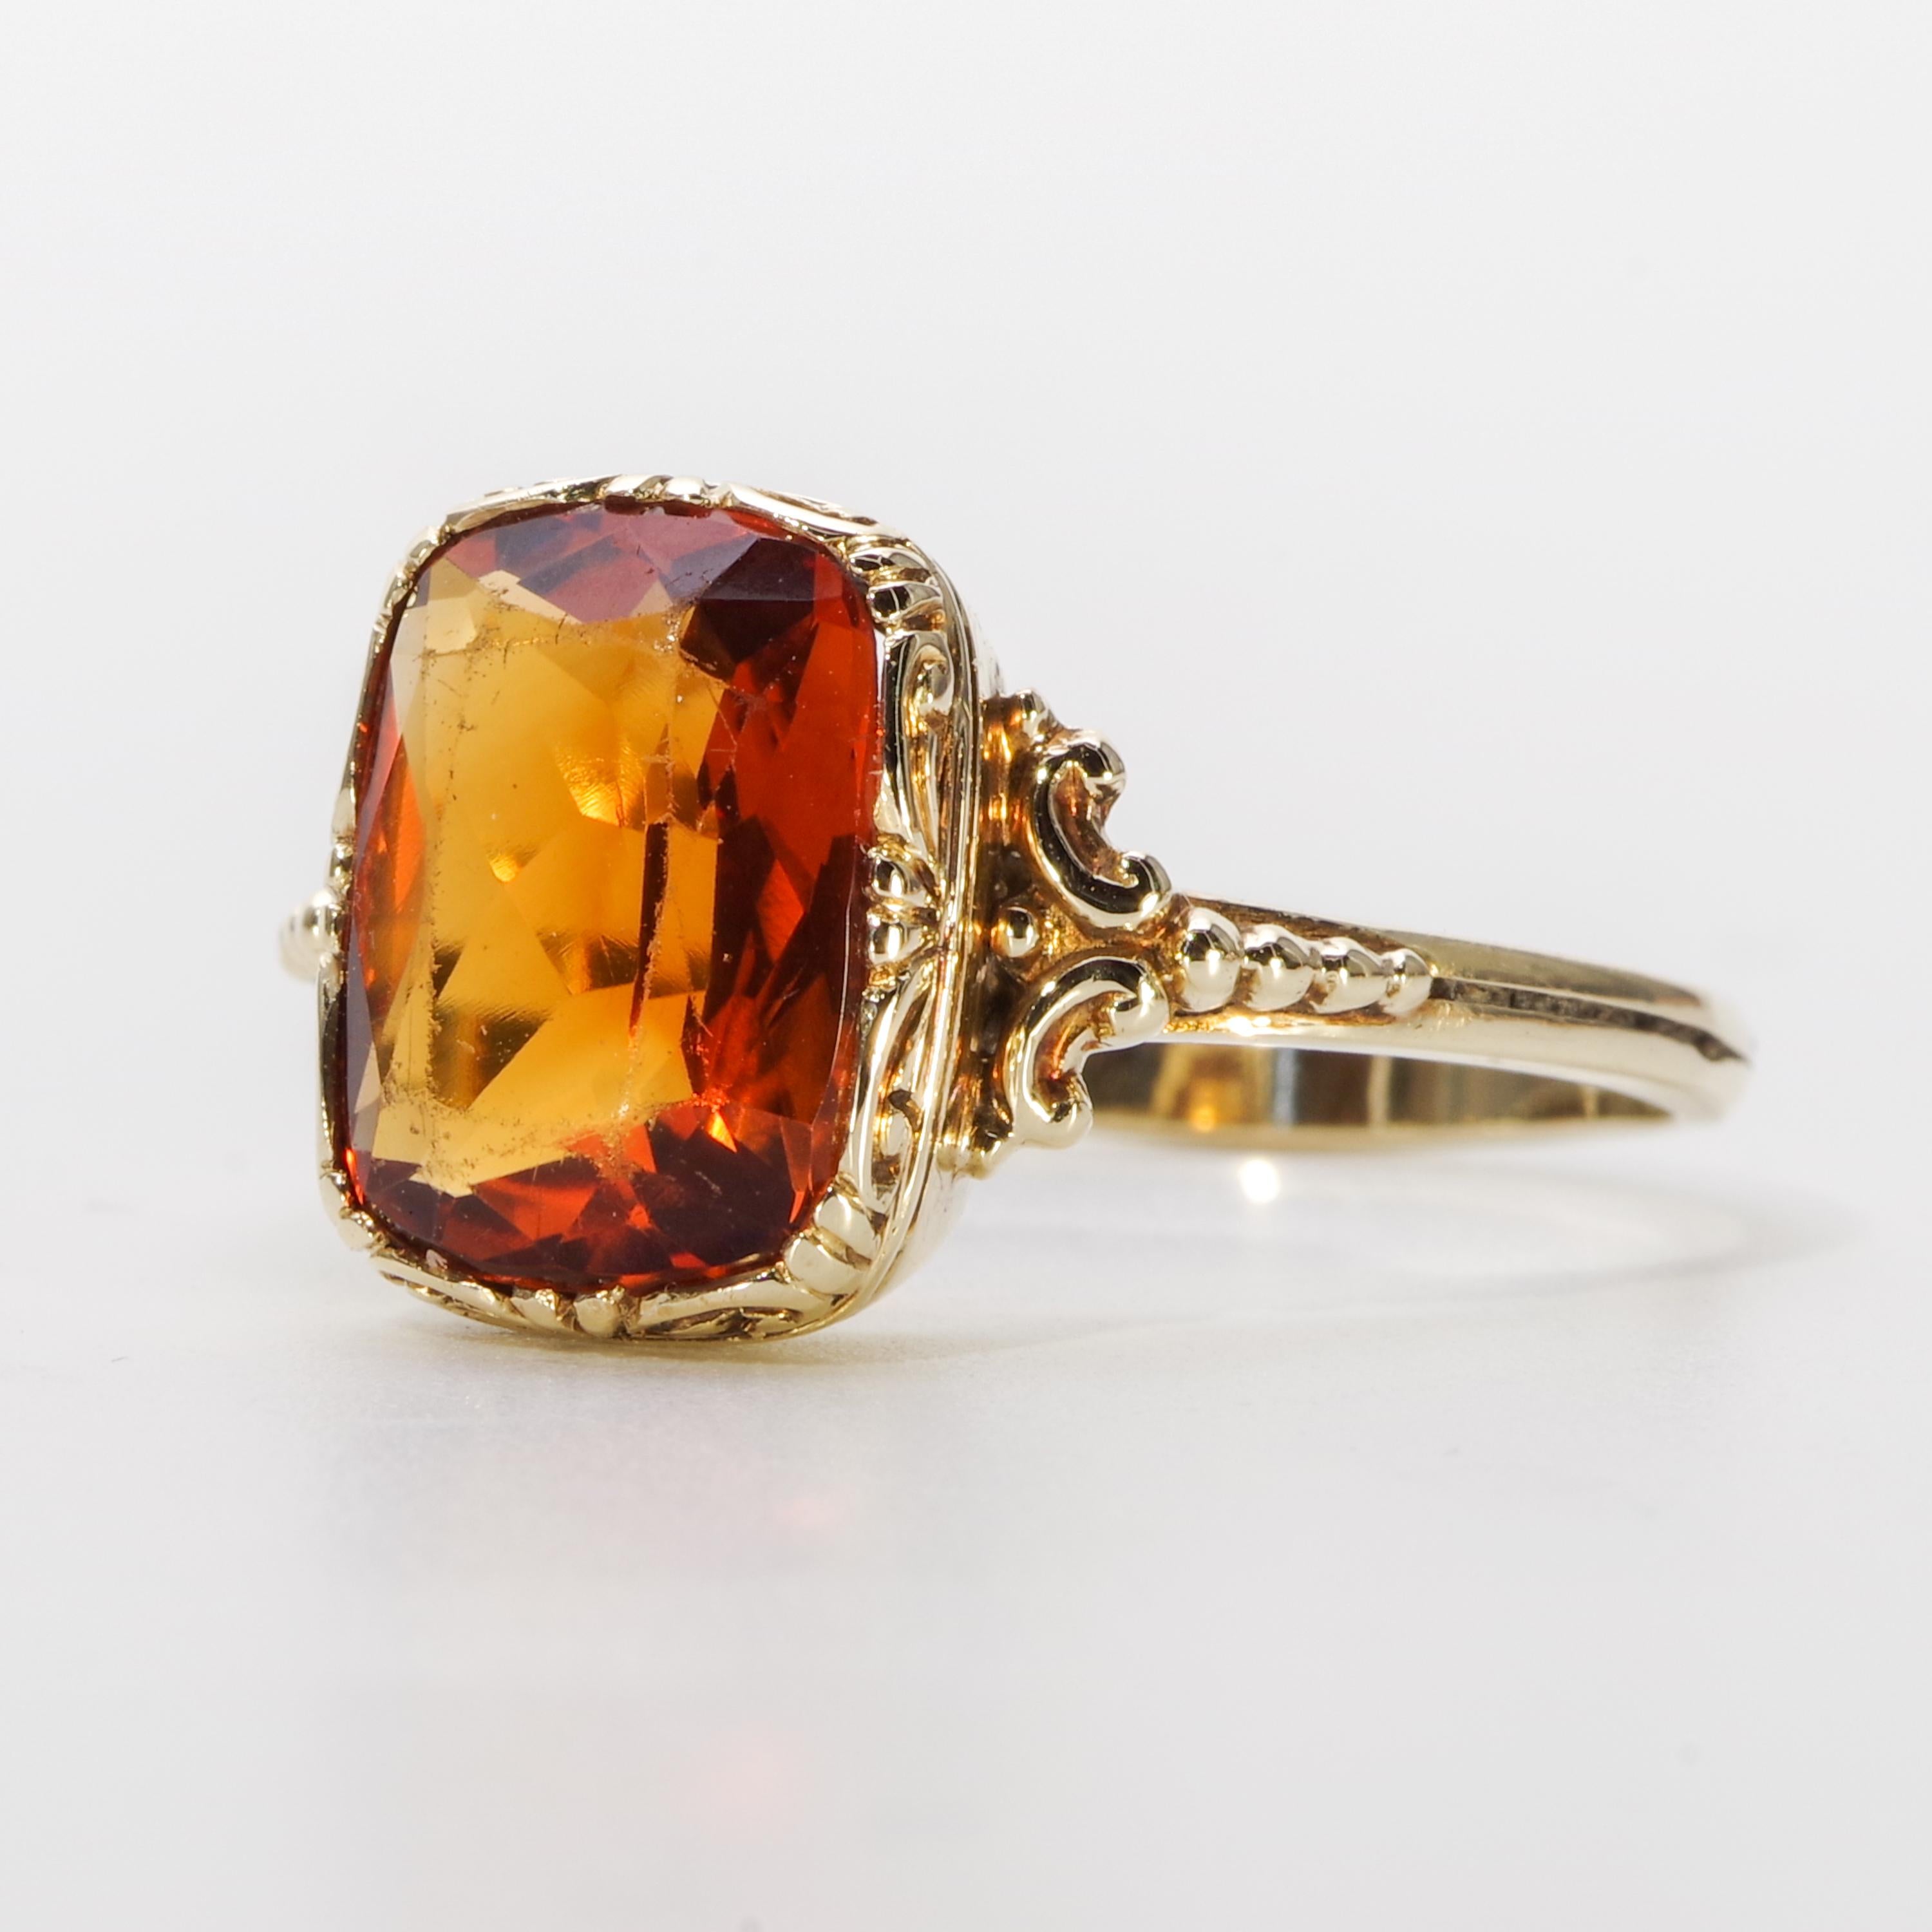 Men used to wear rings like this. Men used to be cool. 

This regal 14k green-ish gold ring features a Madeira citrine of approximately 5 carats. Citrine is kind of an ordinary gemstone but *Madeira* citrine is the opposite of ordinary. It's named